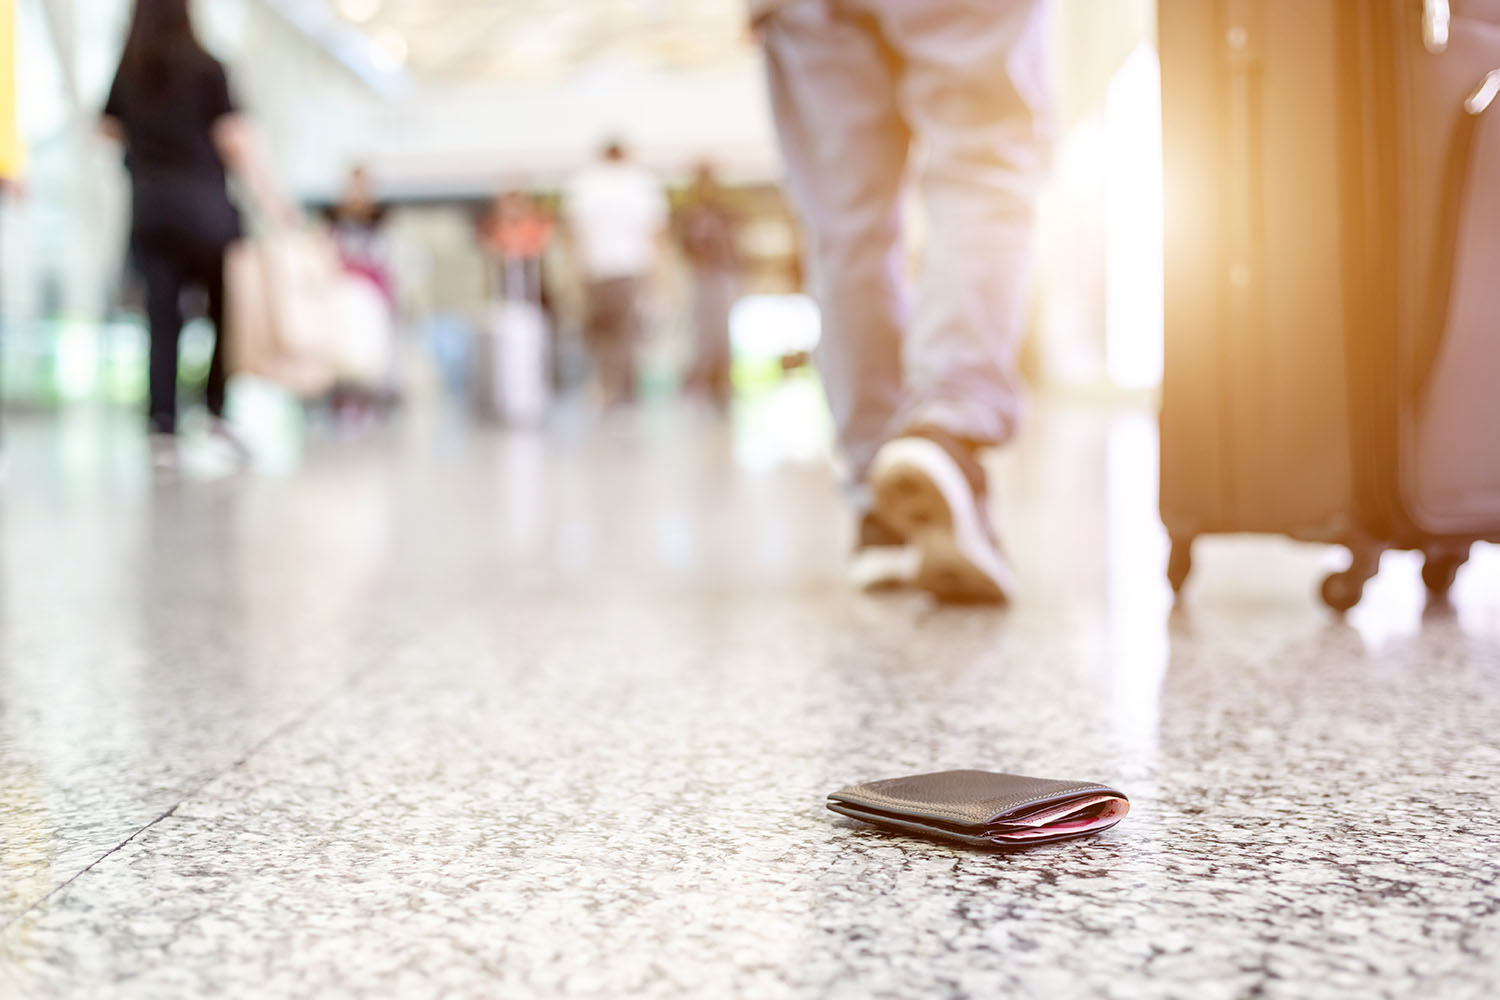 Travelers lost their wallet on the floor at the airport